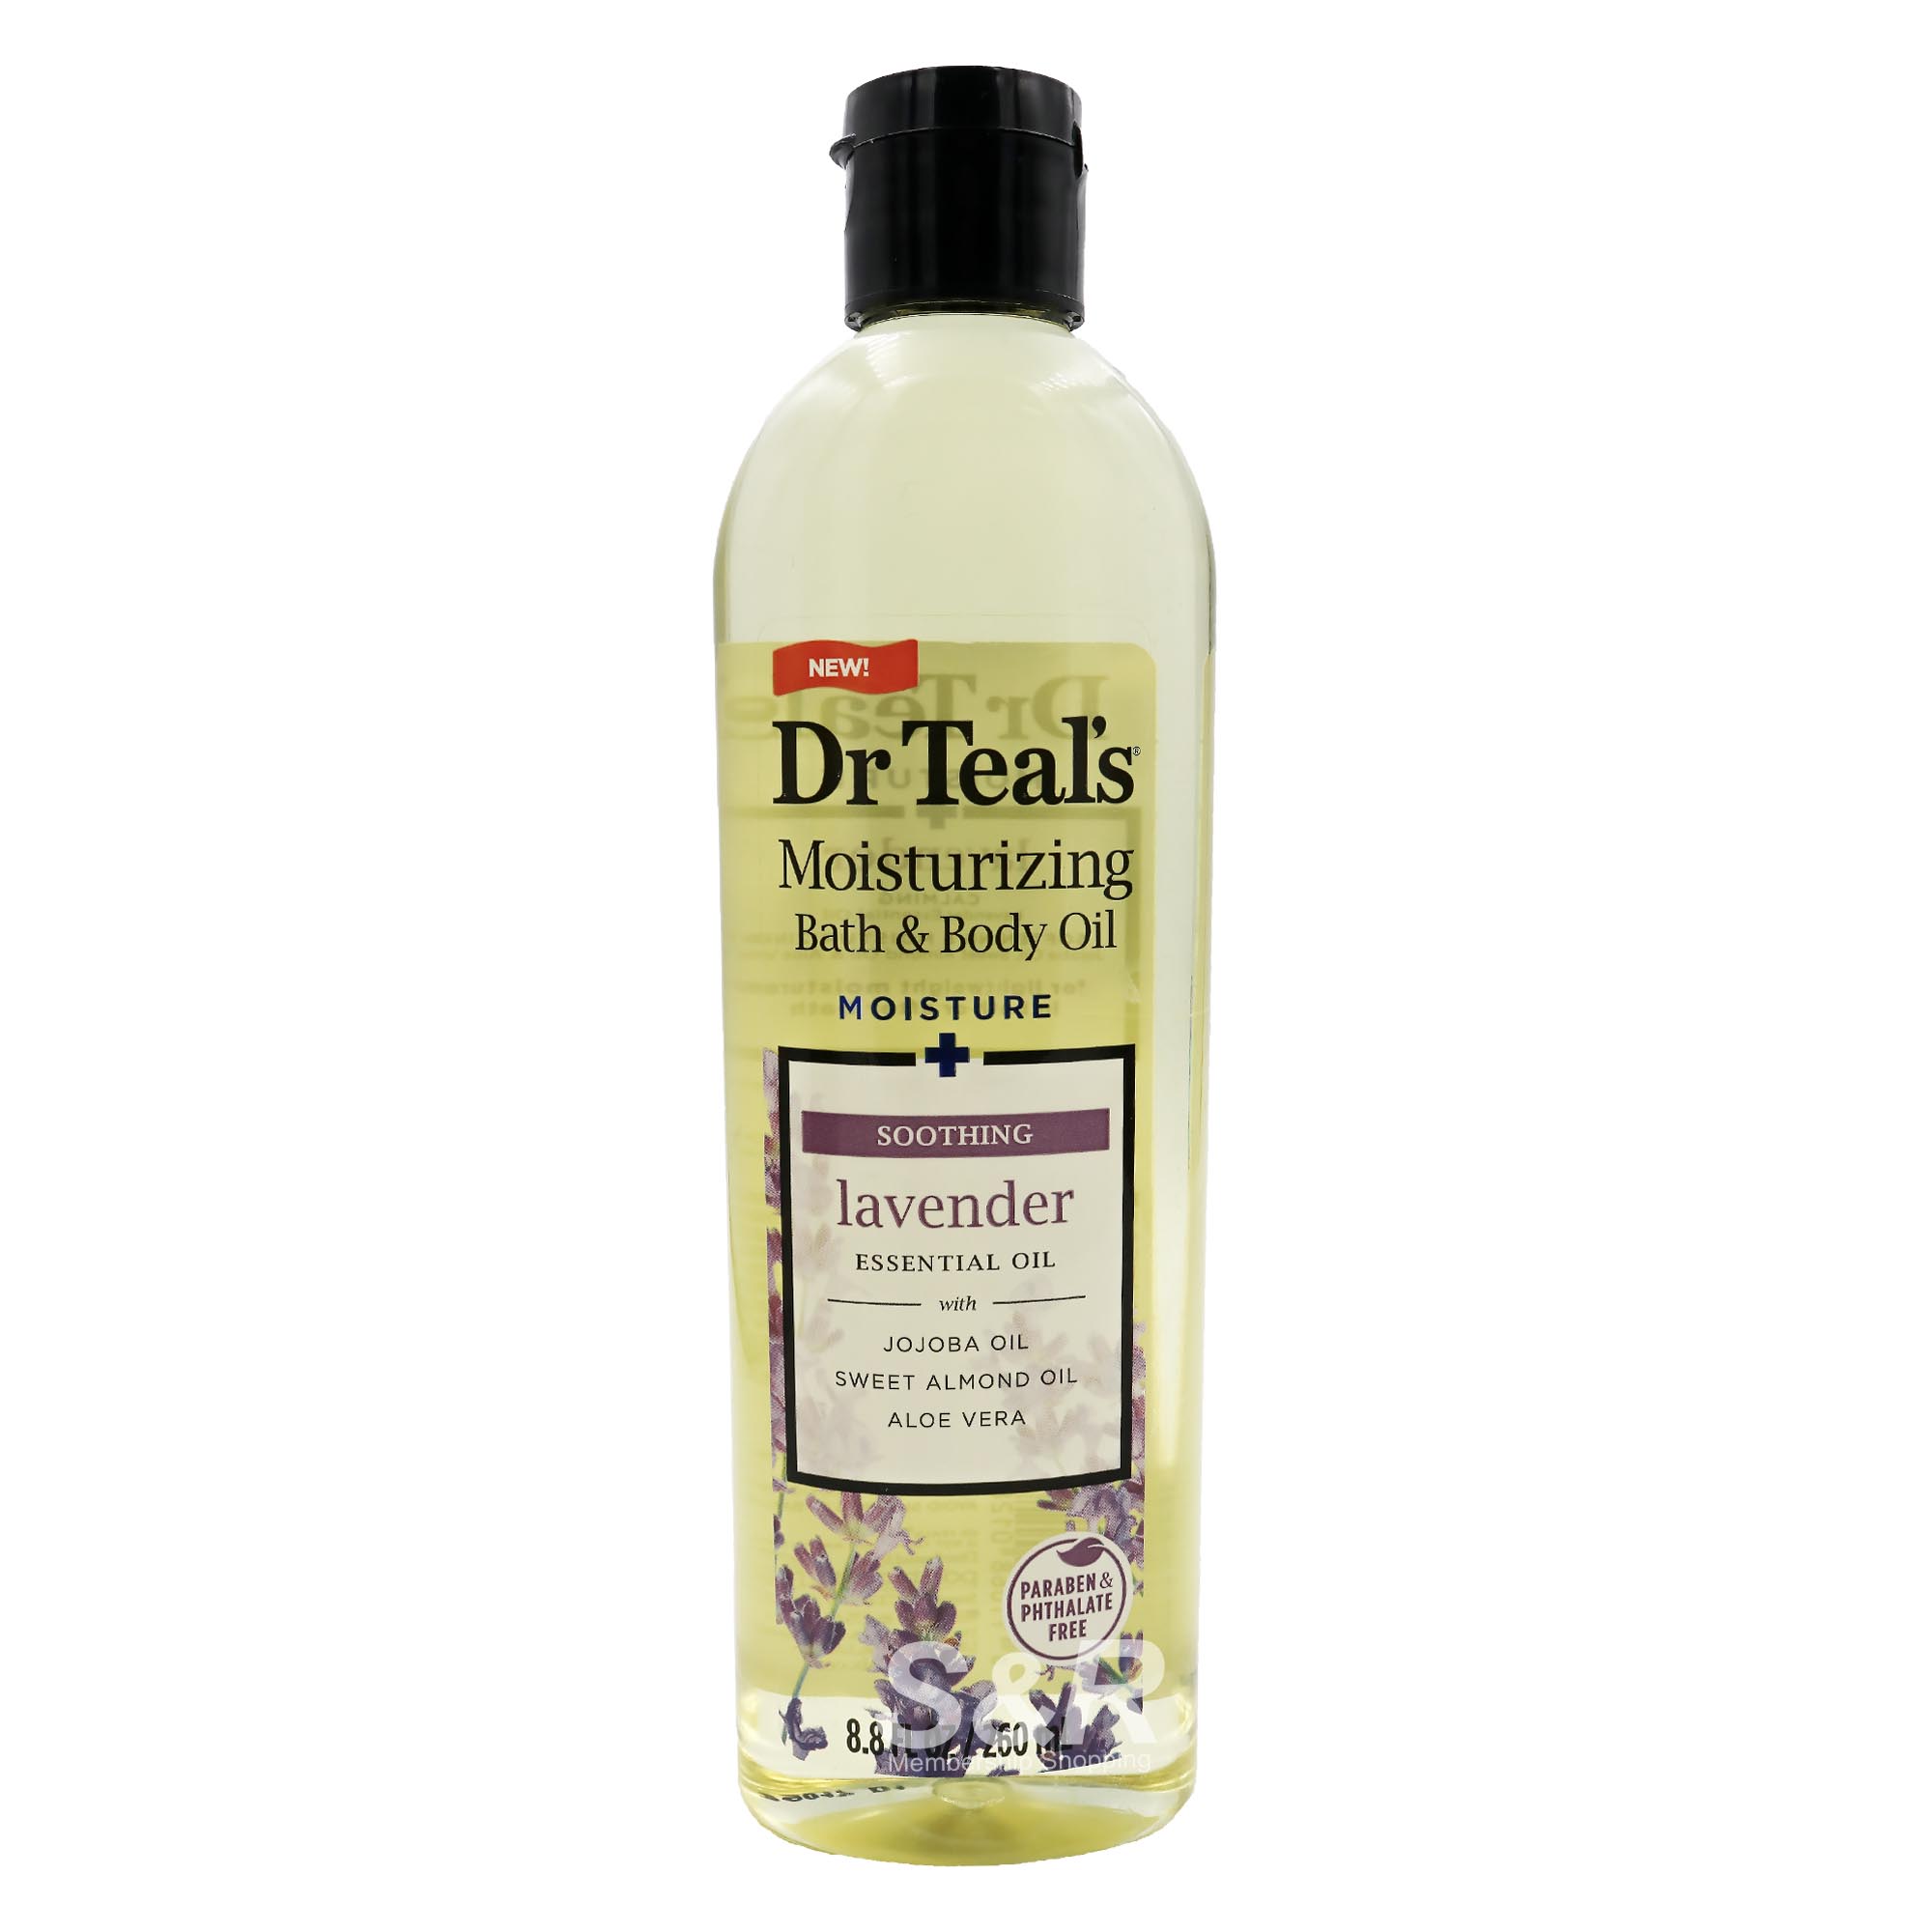 Dr. Teal's Moisturizing Bath and Body Oil Moisture plus Soothing Lavender 260mL